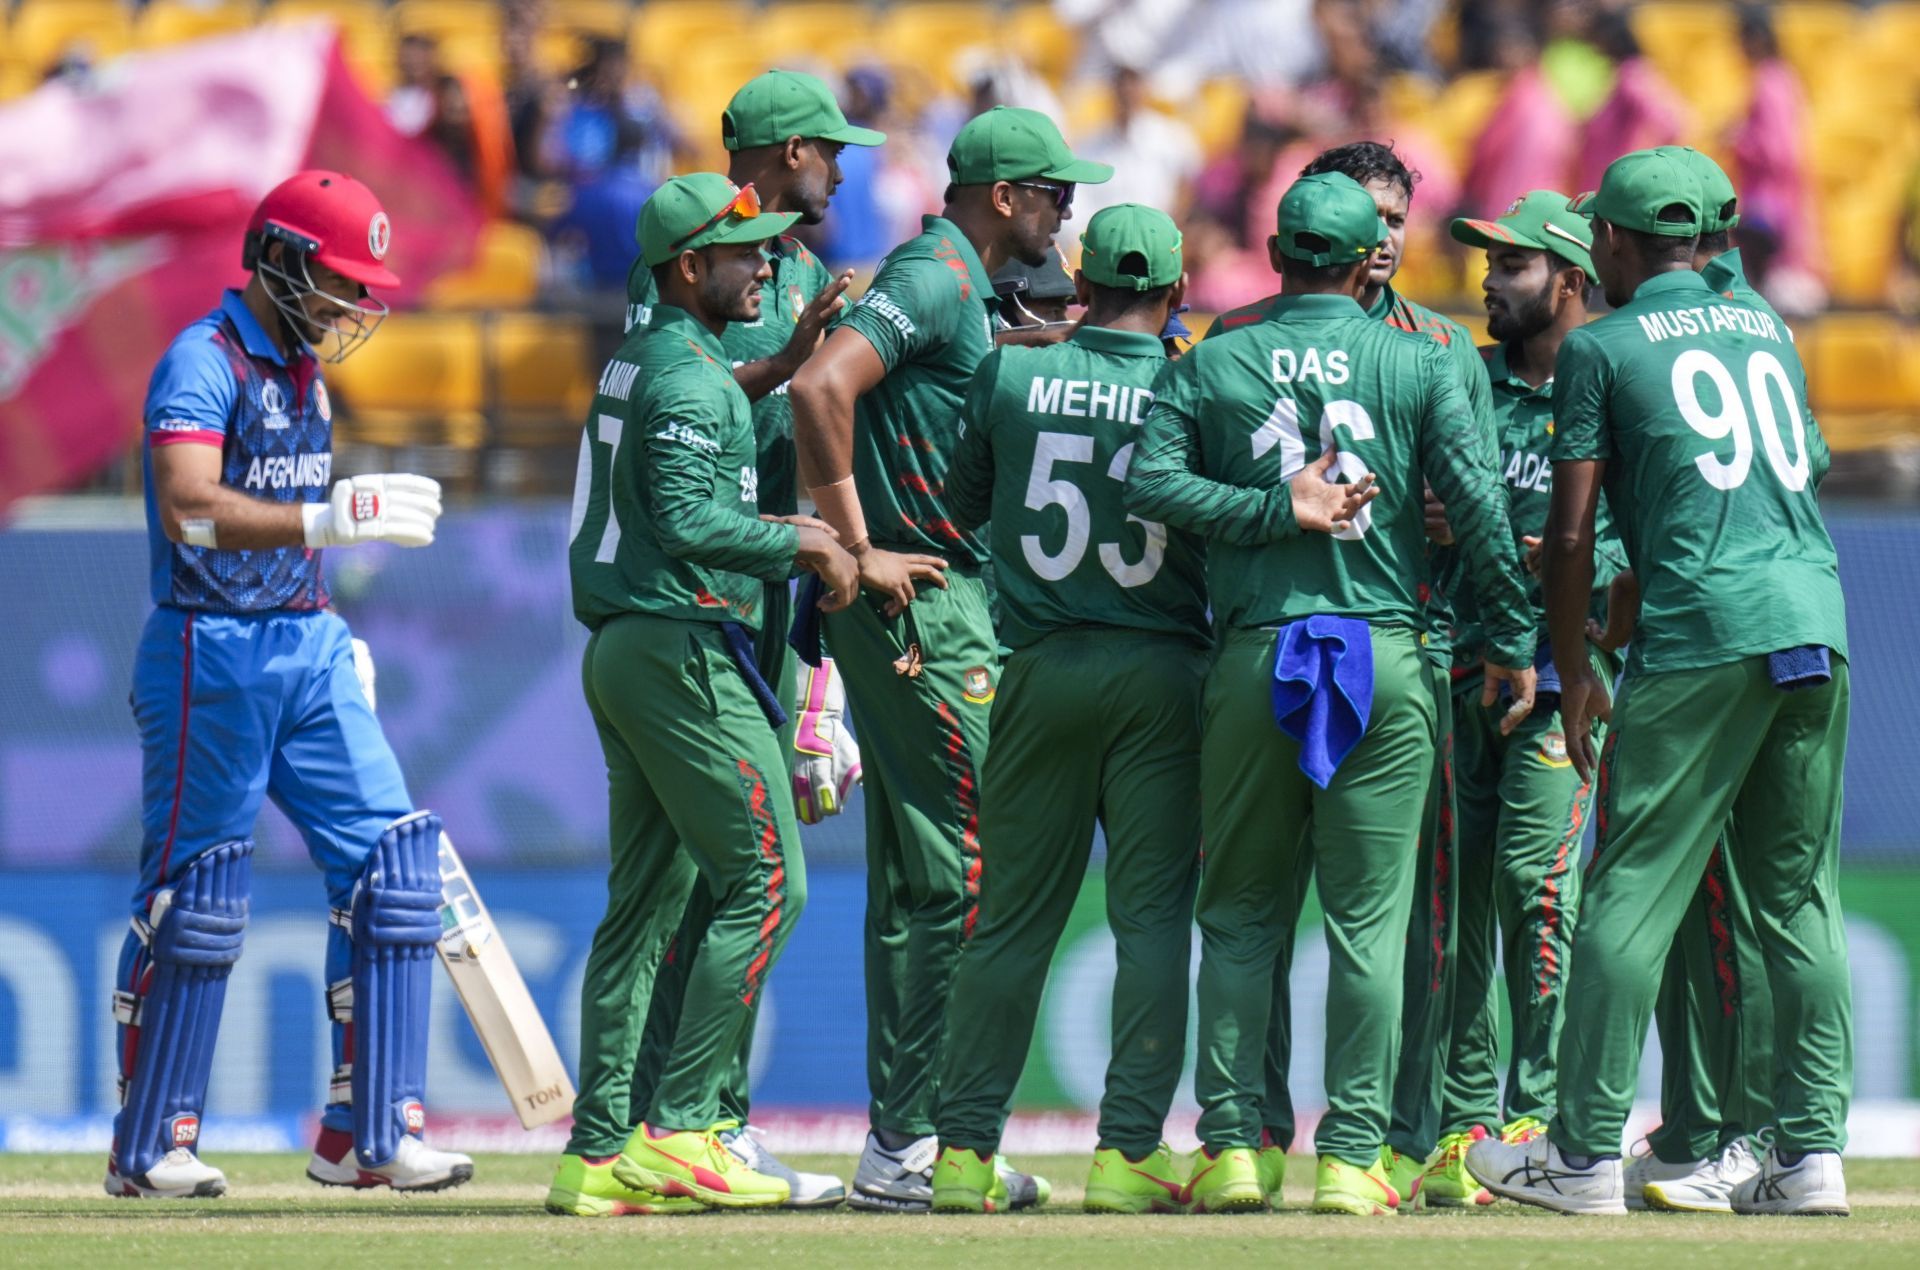 Afghanistan failed to put up a fight in their World Cup opener against Bangladesh. [P/C: AP]